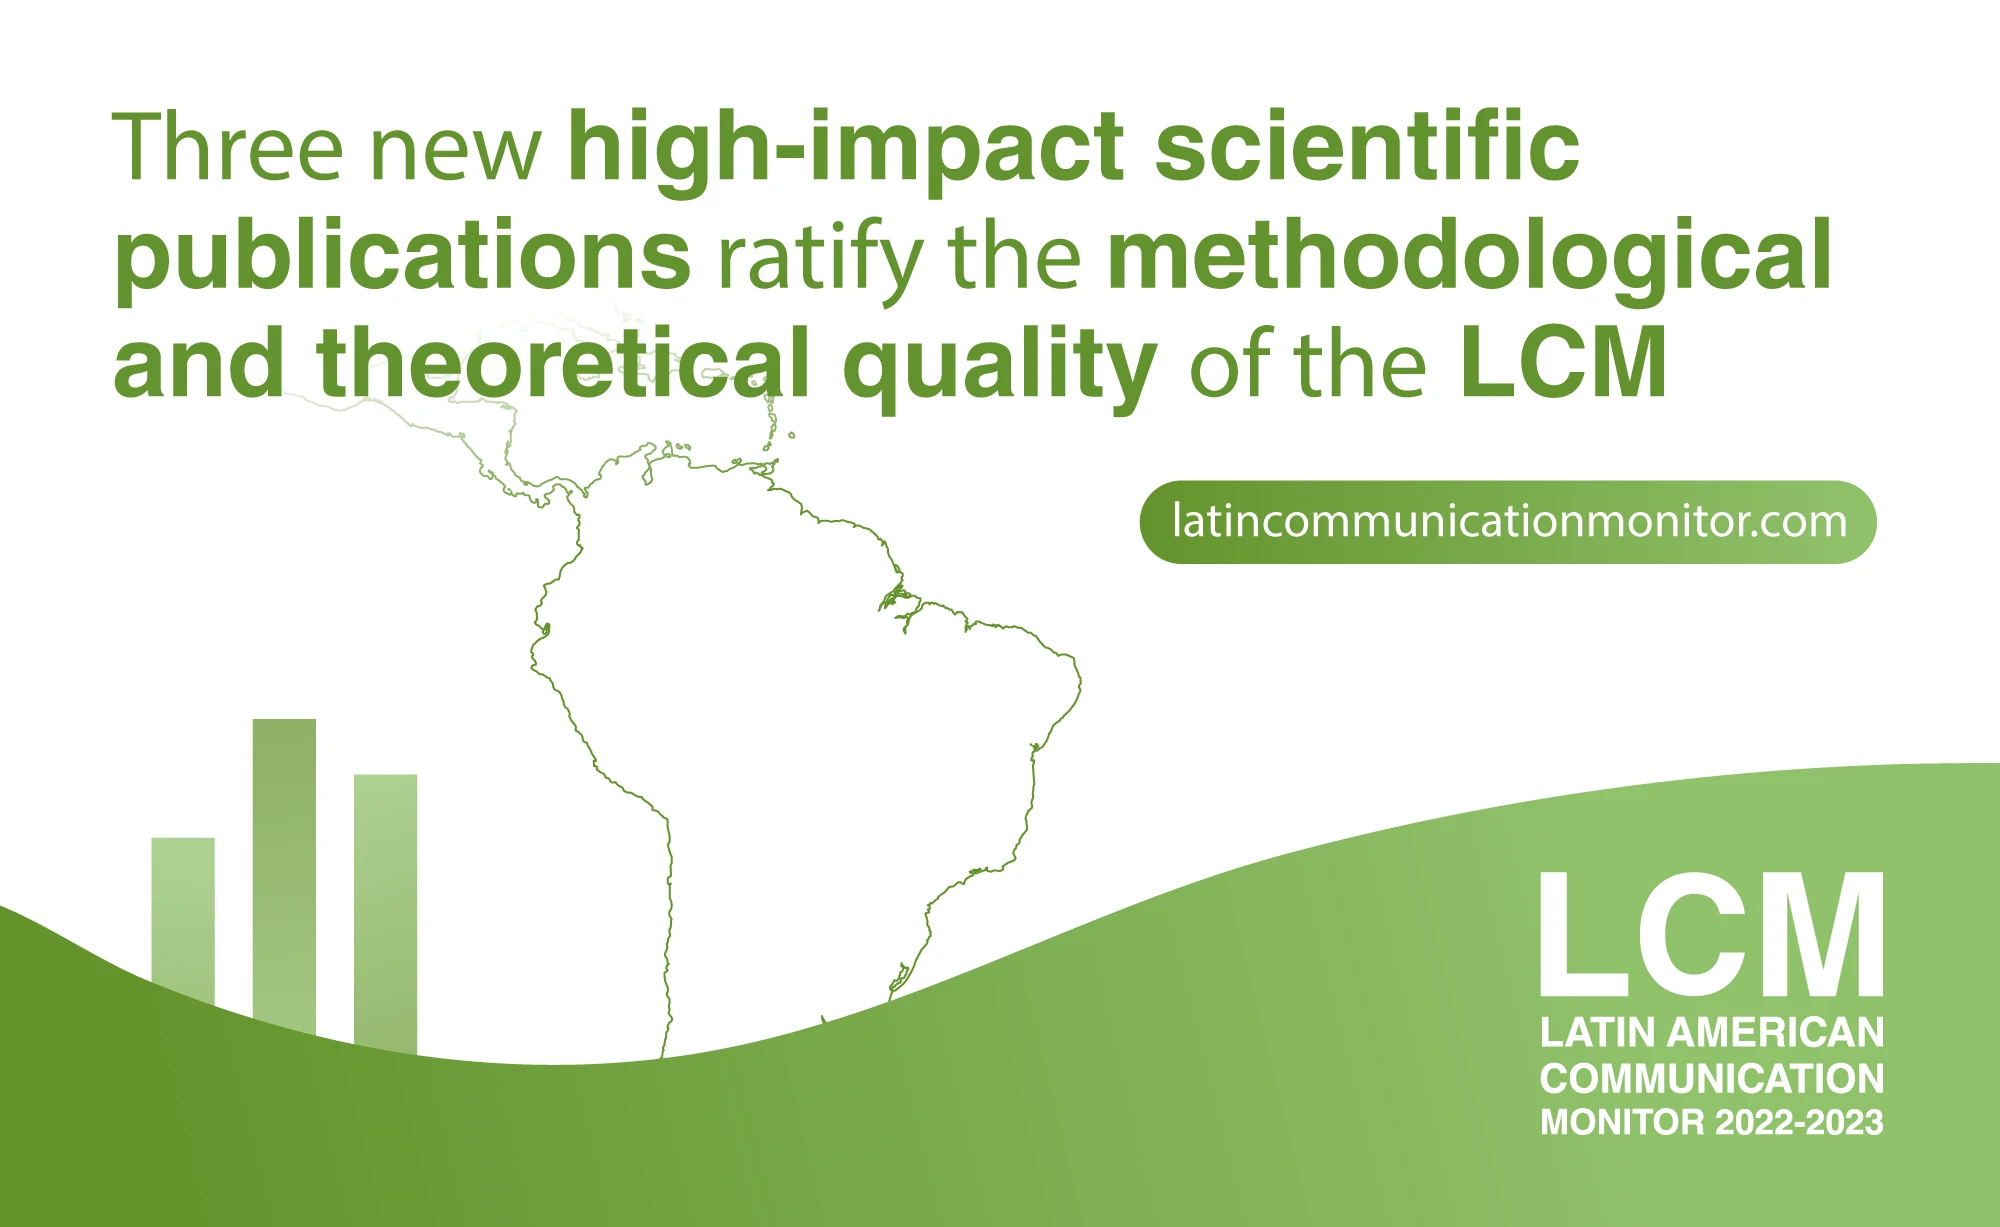 Three new high-impact scientific publications confirm the methodological and theoretical quality of the LCM